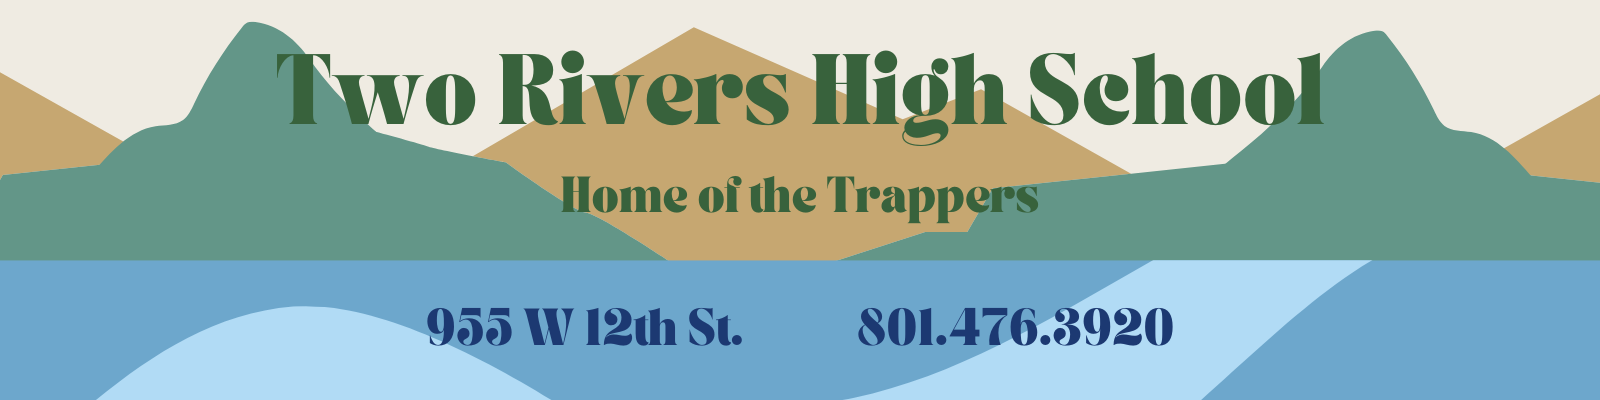 Two Rivers High School. Home of the Trappers. - 955 W 12th St. 801-476-3920